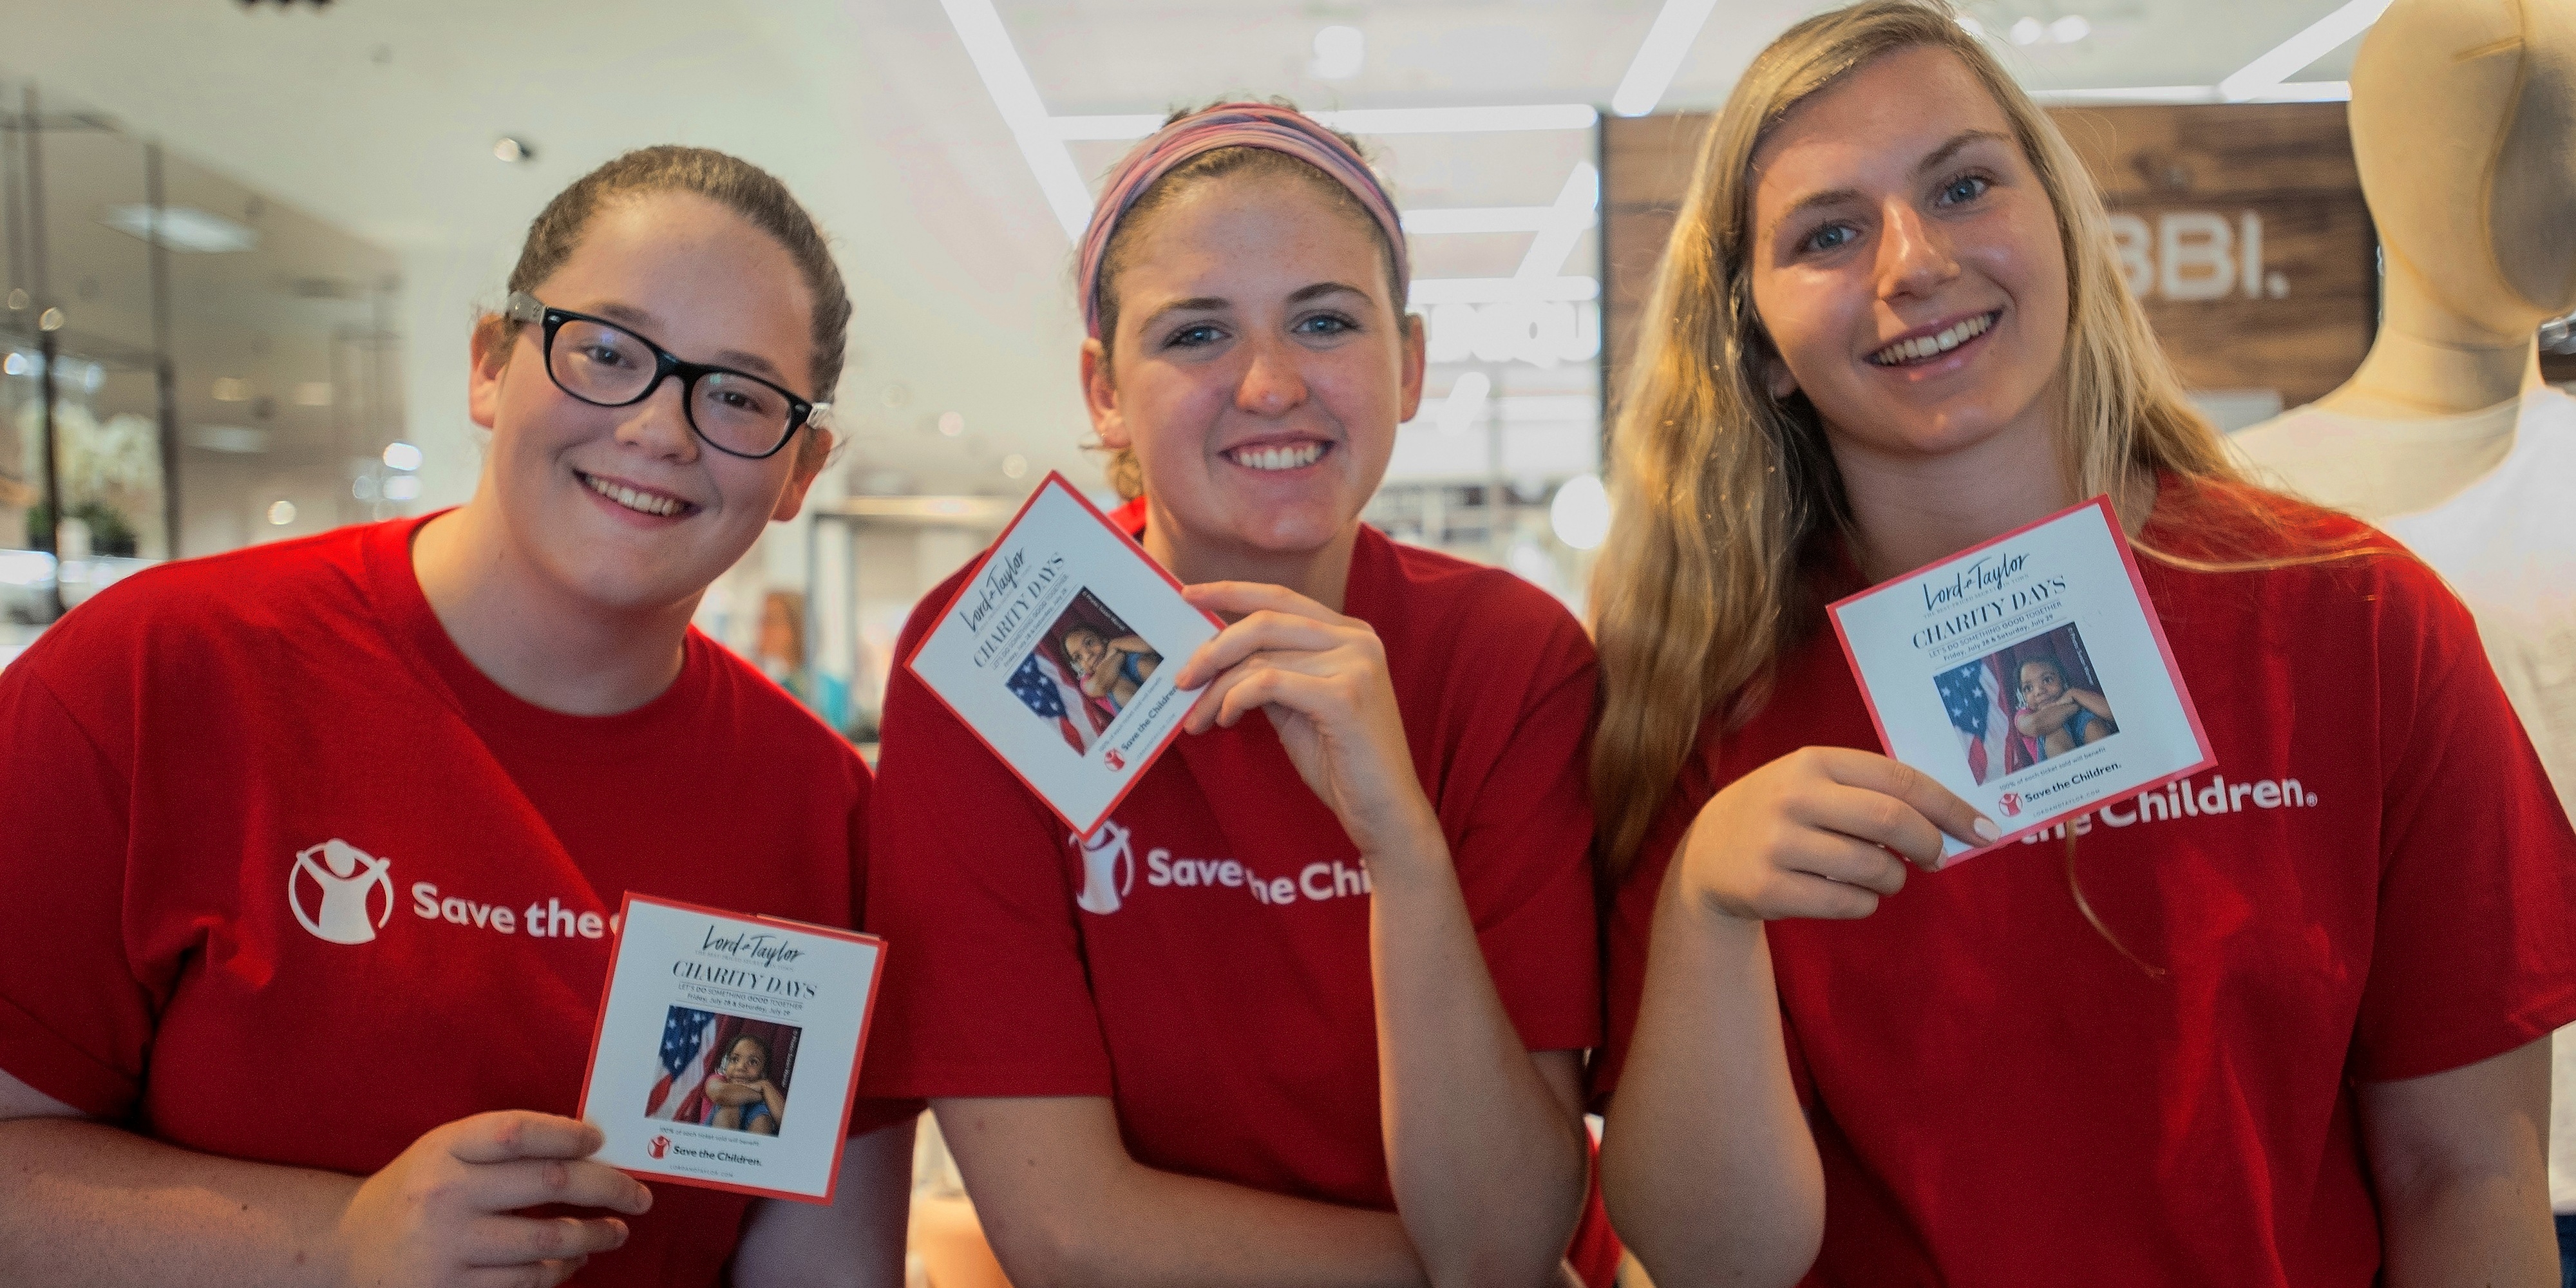 Three women wearing red Save the Children shirts and holding campaign cards gather together at a Save the Children store event. The women are volunteers helping to promote a campaign throughout the store. Photo credit: Susan Warner/Save the Children, July 2017.